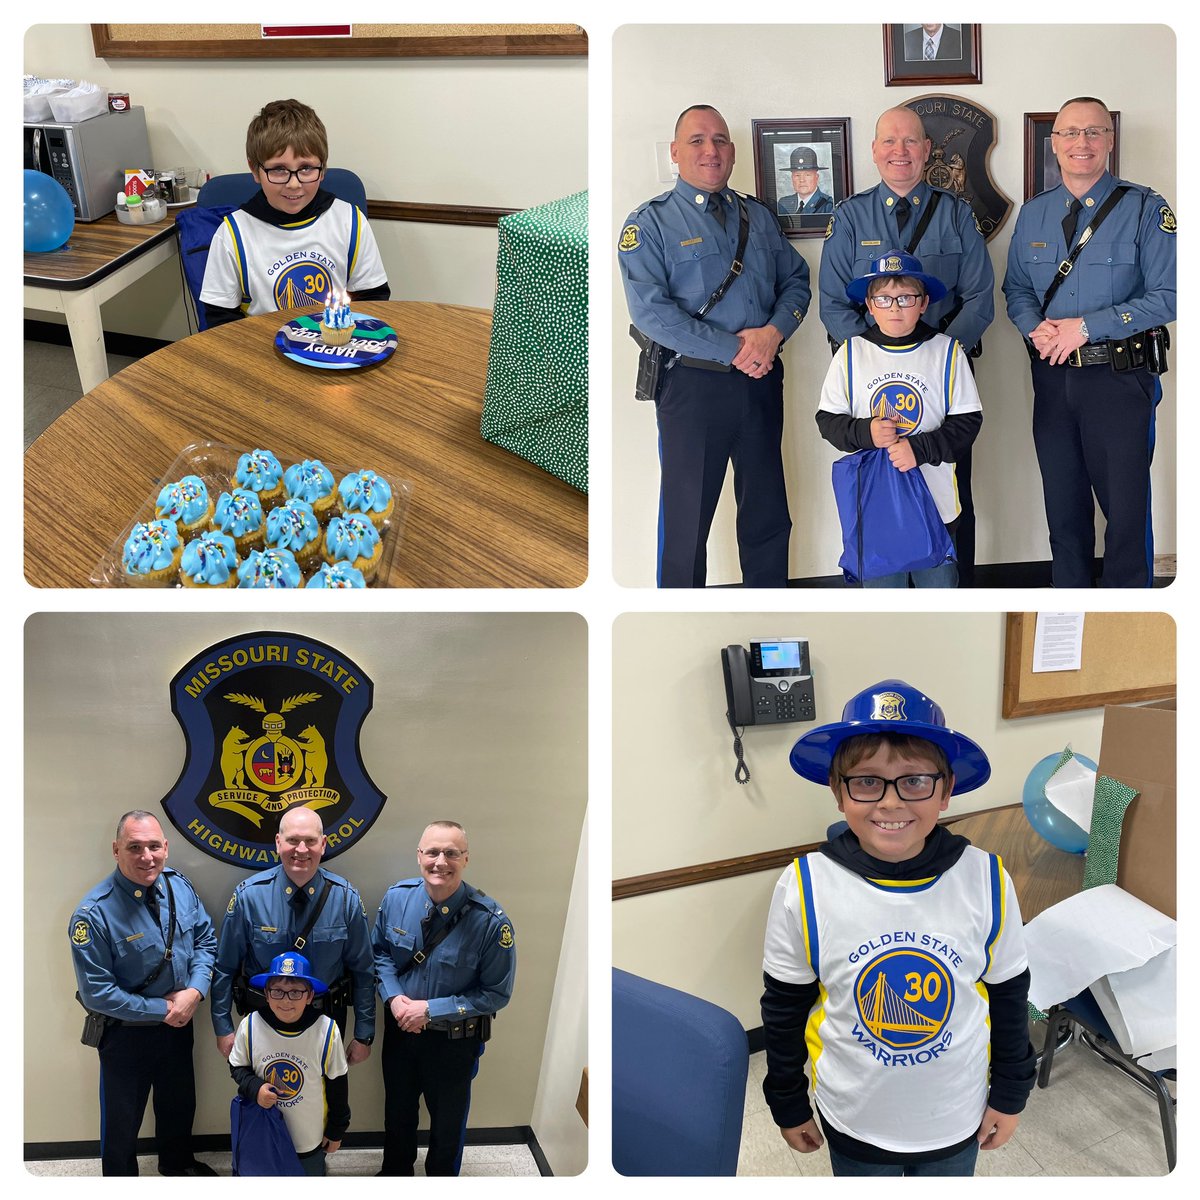 Thrilled to welcome Beckem to Troop H Headquarters! Celebrating his 9th birthday, Beckem's wish was to visit us. What an incredible young man! 🎉 #HappyBirthdayBeckem